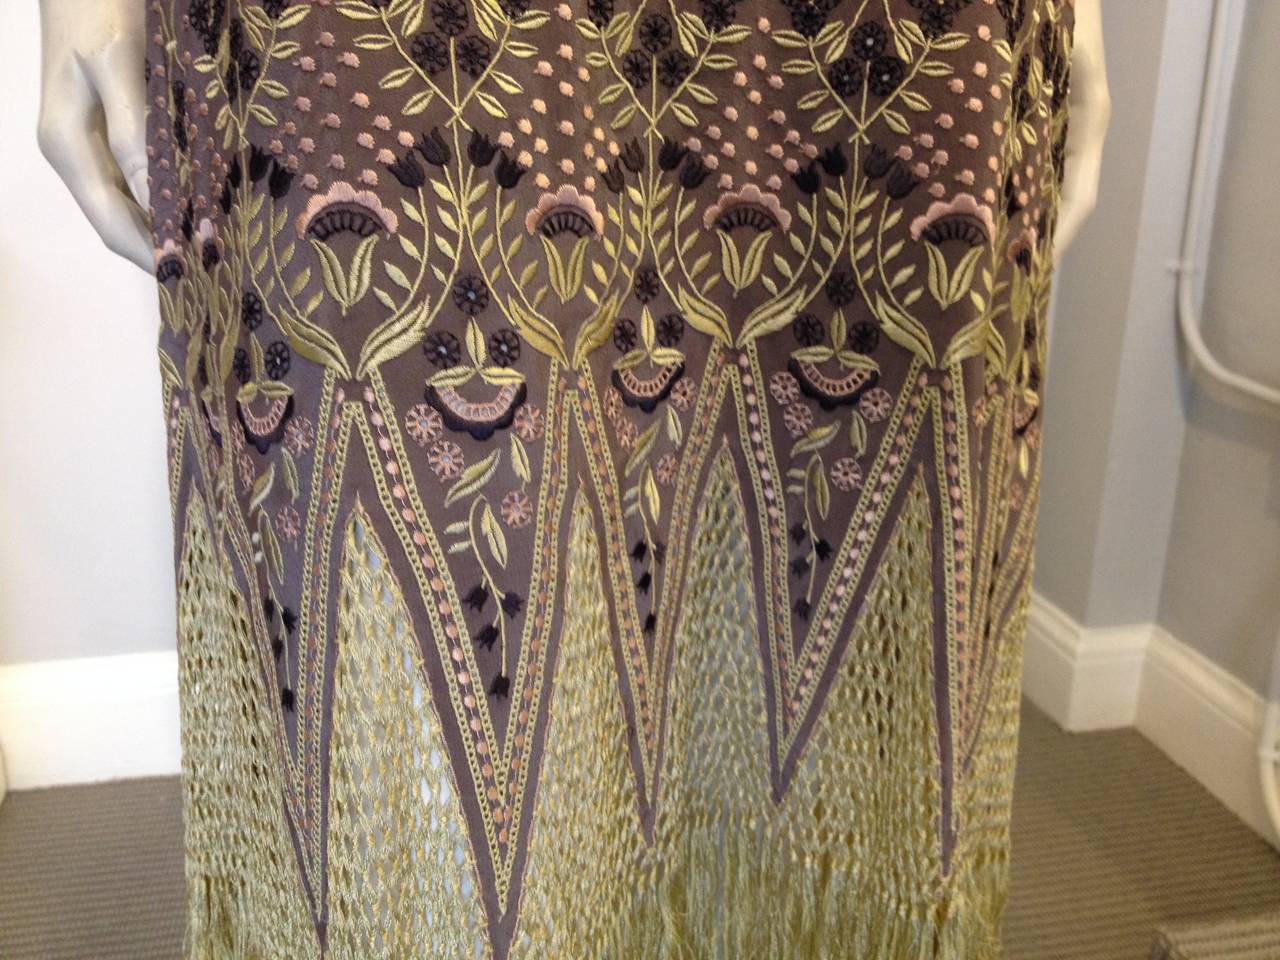 Live your art deco dreams! This Chloe piece is intricate and elaborate, and beautifully crafted. A soft dusty amethyst silk embroidered with blush dots forms the body of the dress, becoming more ornate towards the hem - at the knees it features a